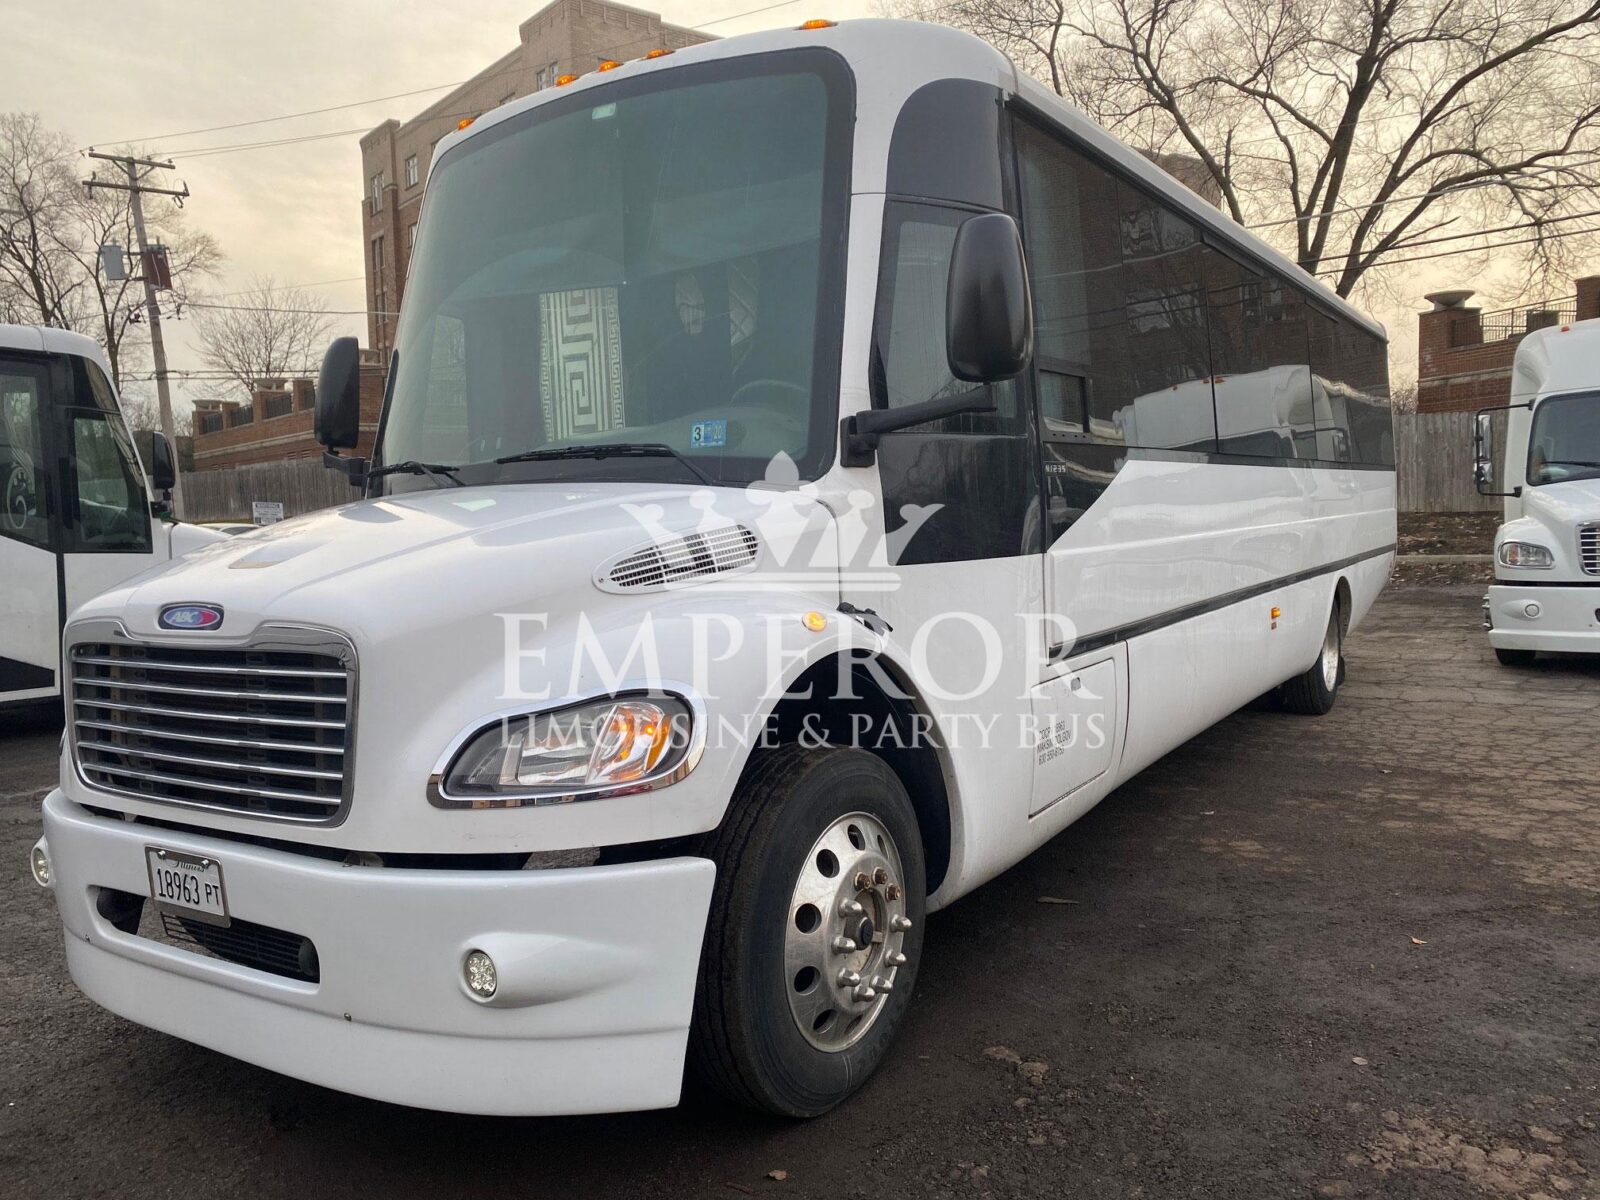 Hire party bus in Saint Charles